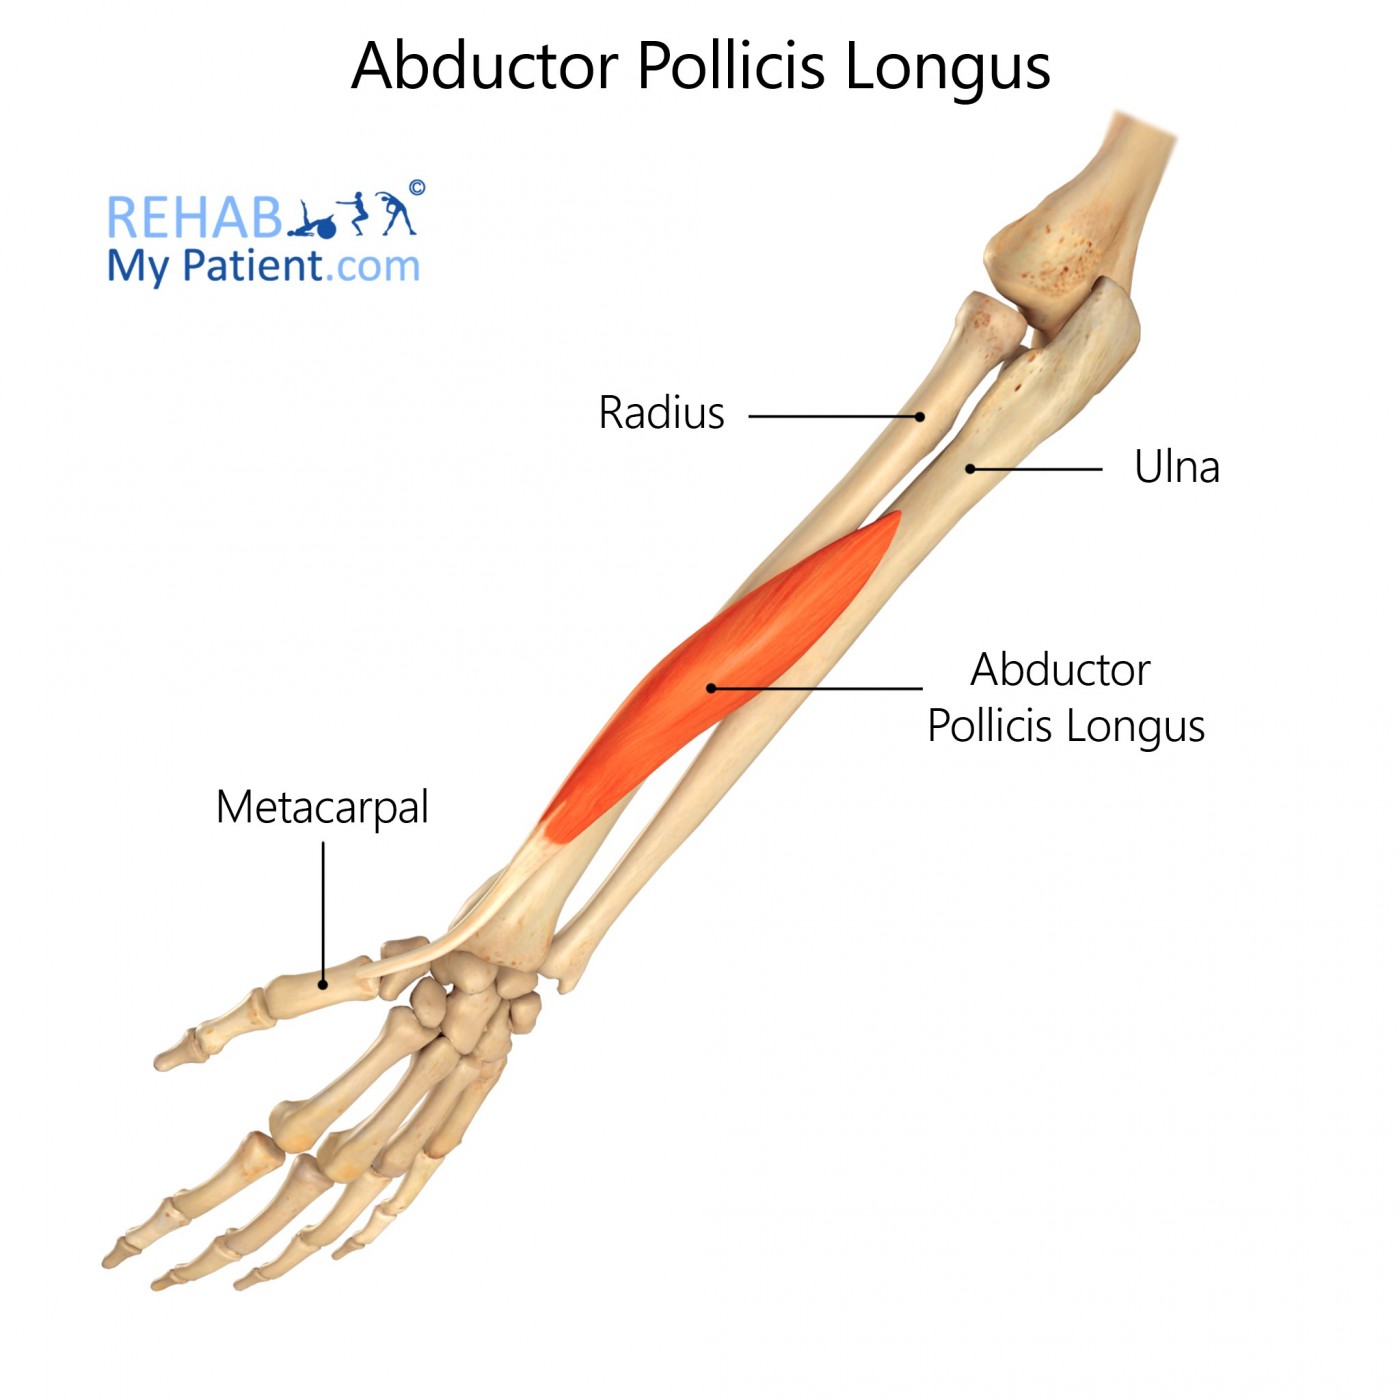 Abductor Pollicis Longus (hand)